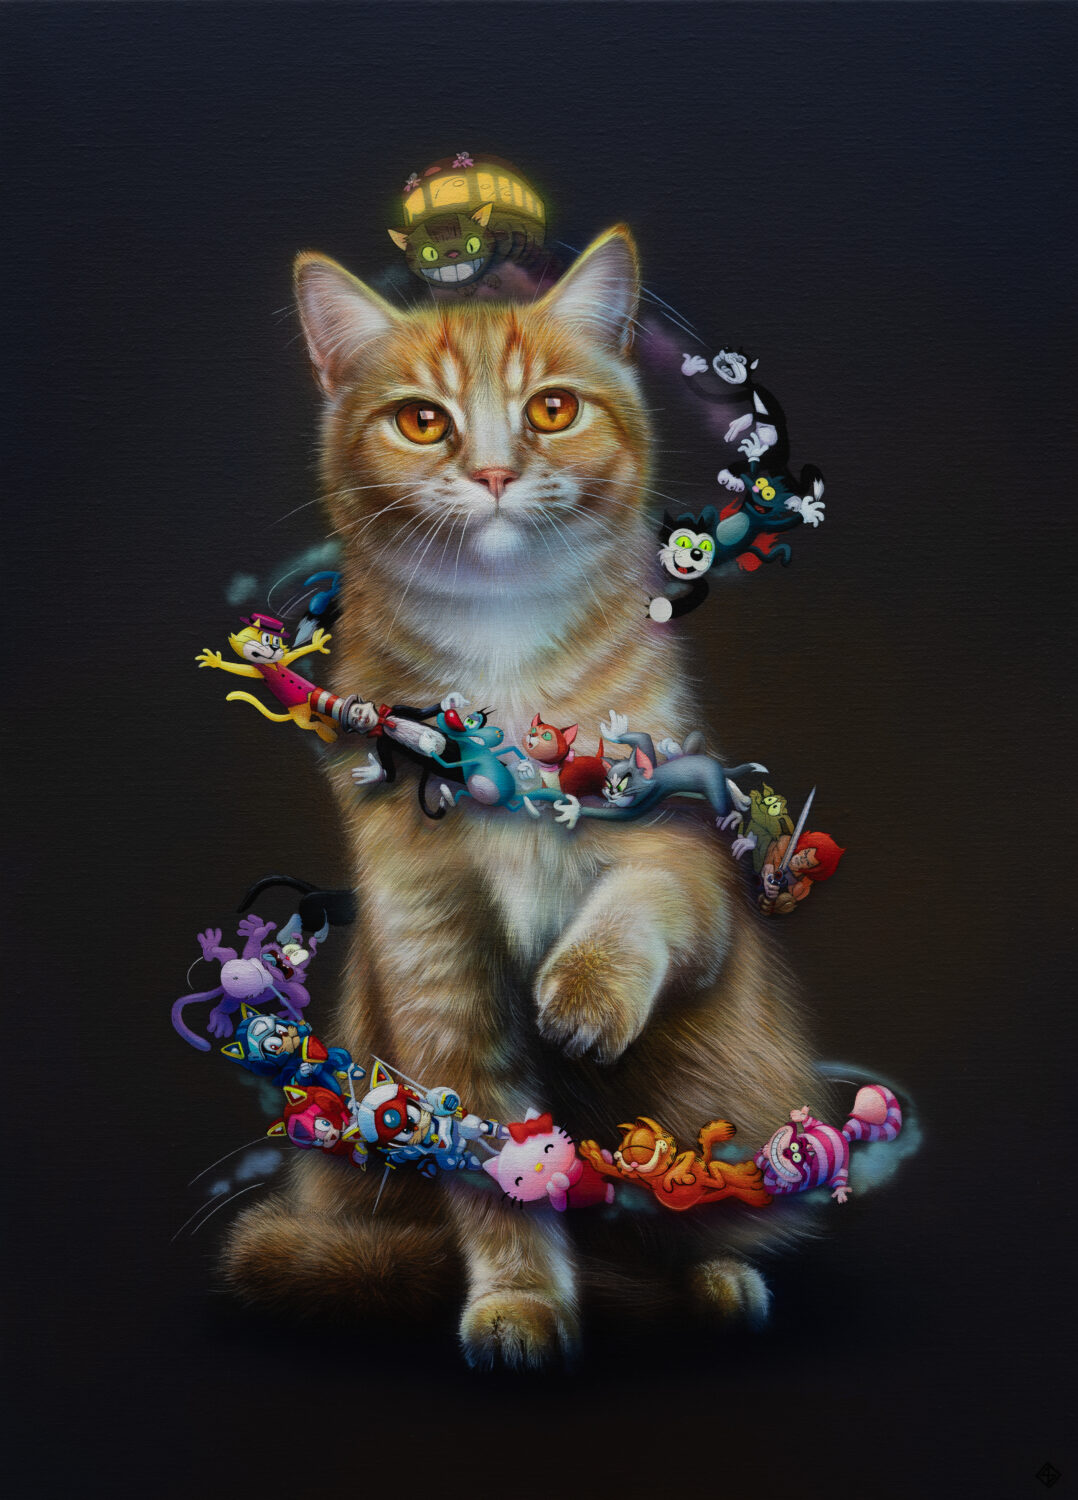 Thinkspace Super A Twisted Cat 1 29 x 21 inches